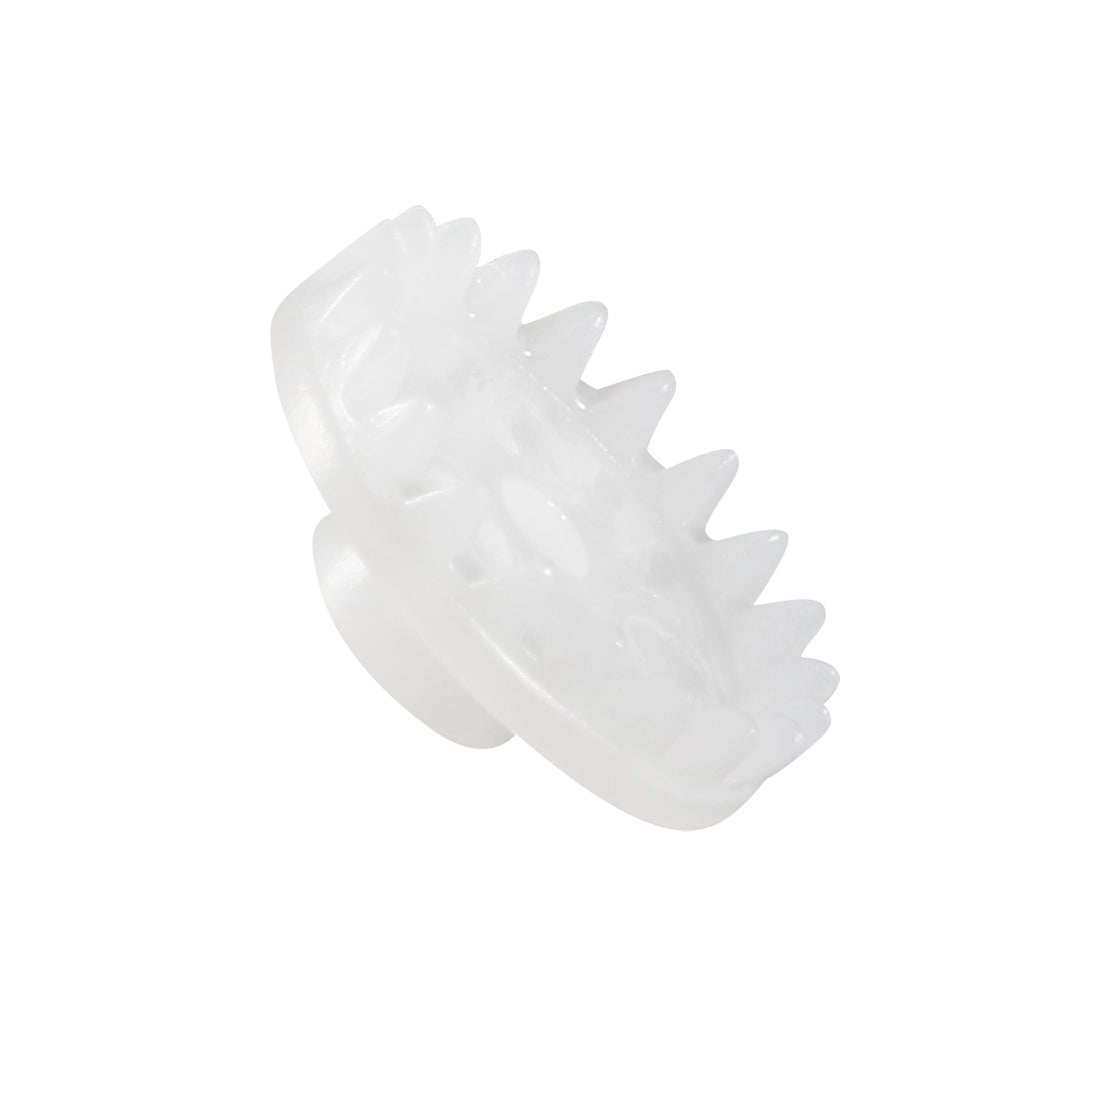 uxcell Uxcell 50Pcs C202A Plastic Gear Accessories with 20 Teeth for DIY Car Robot Motor